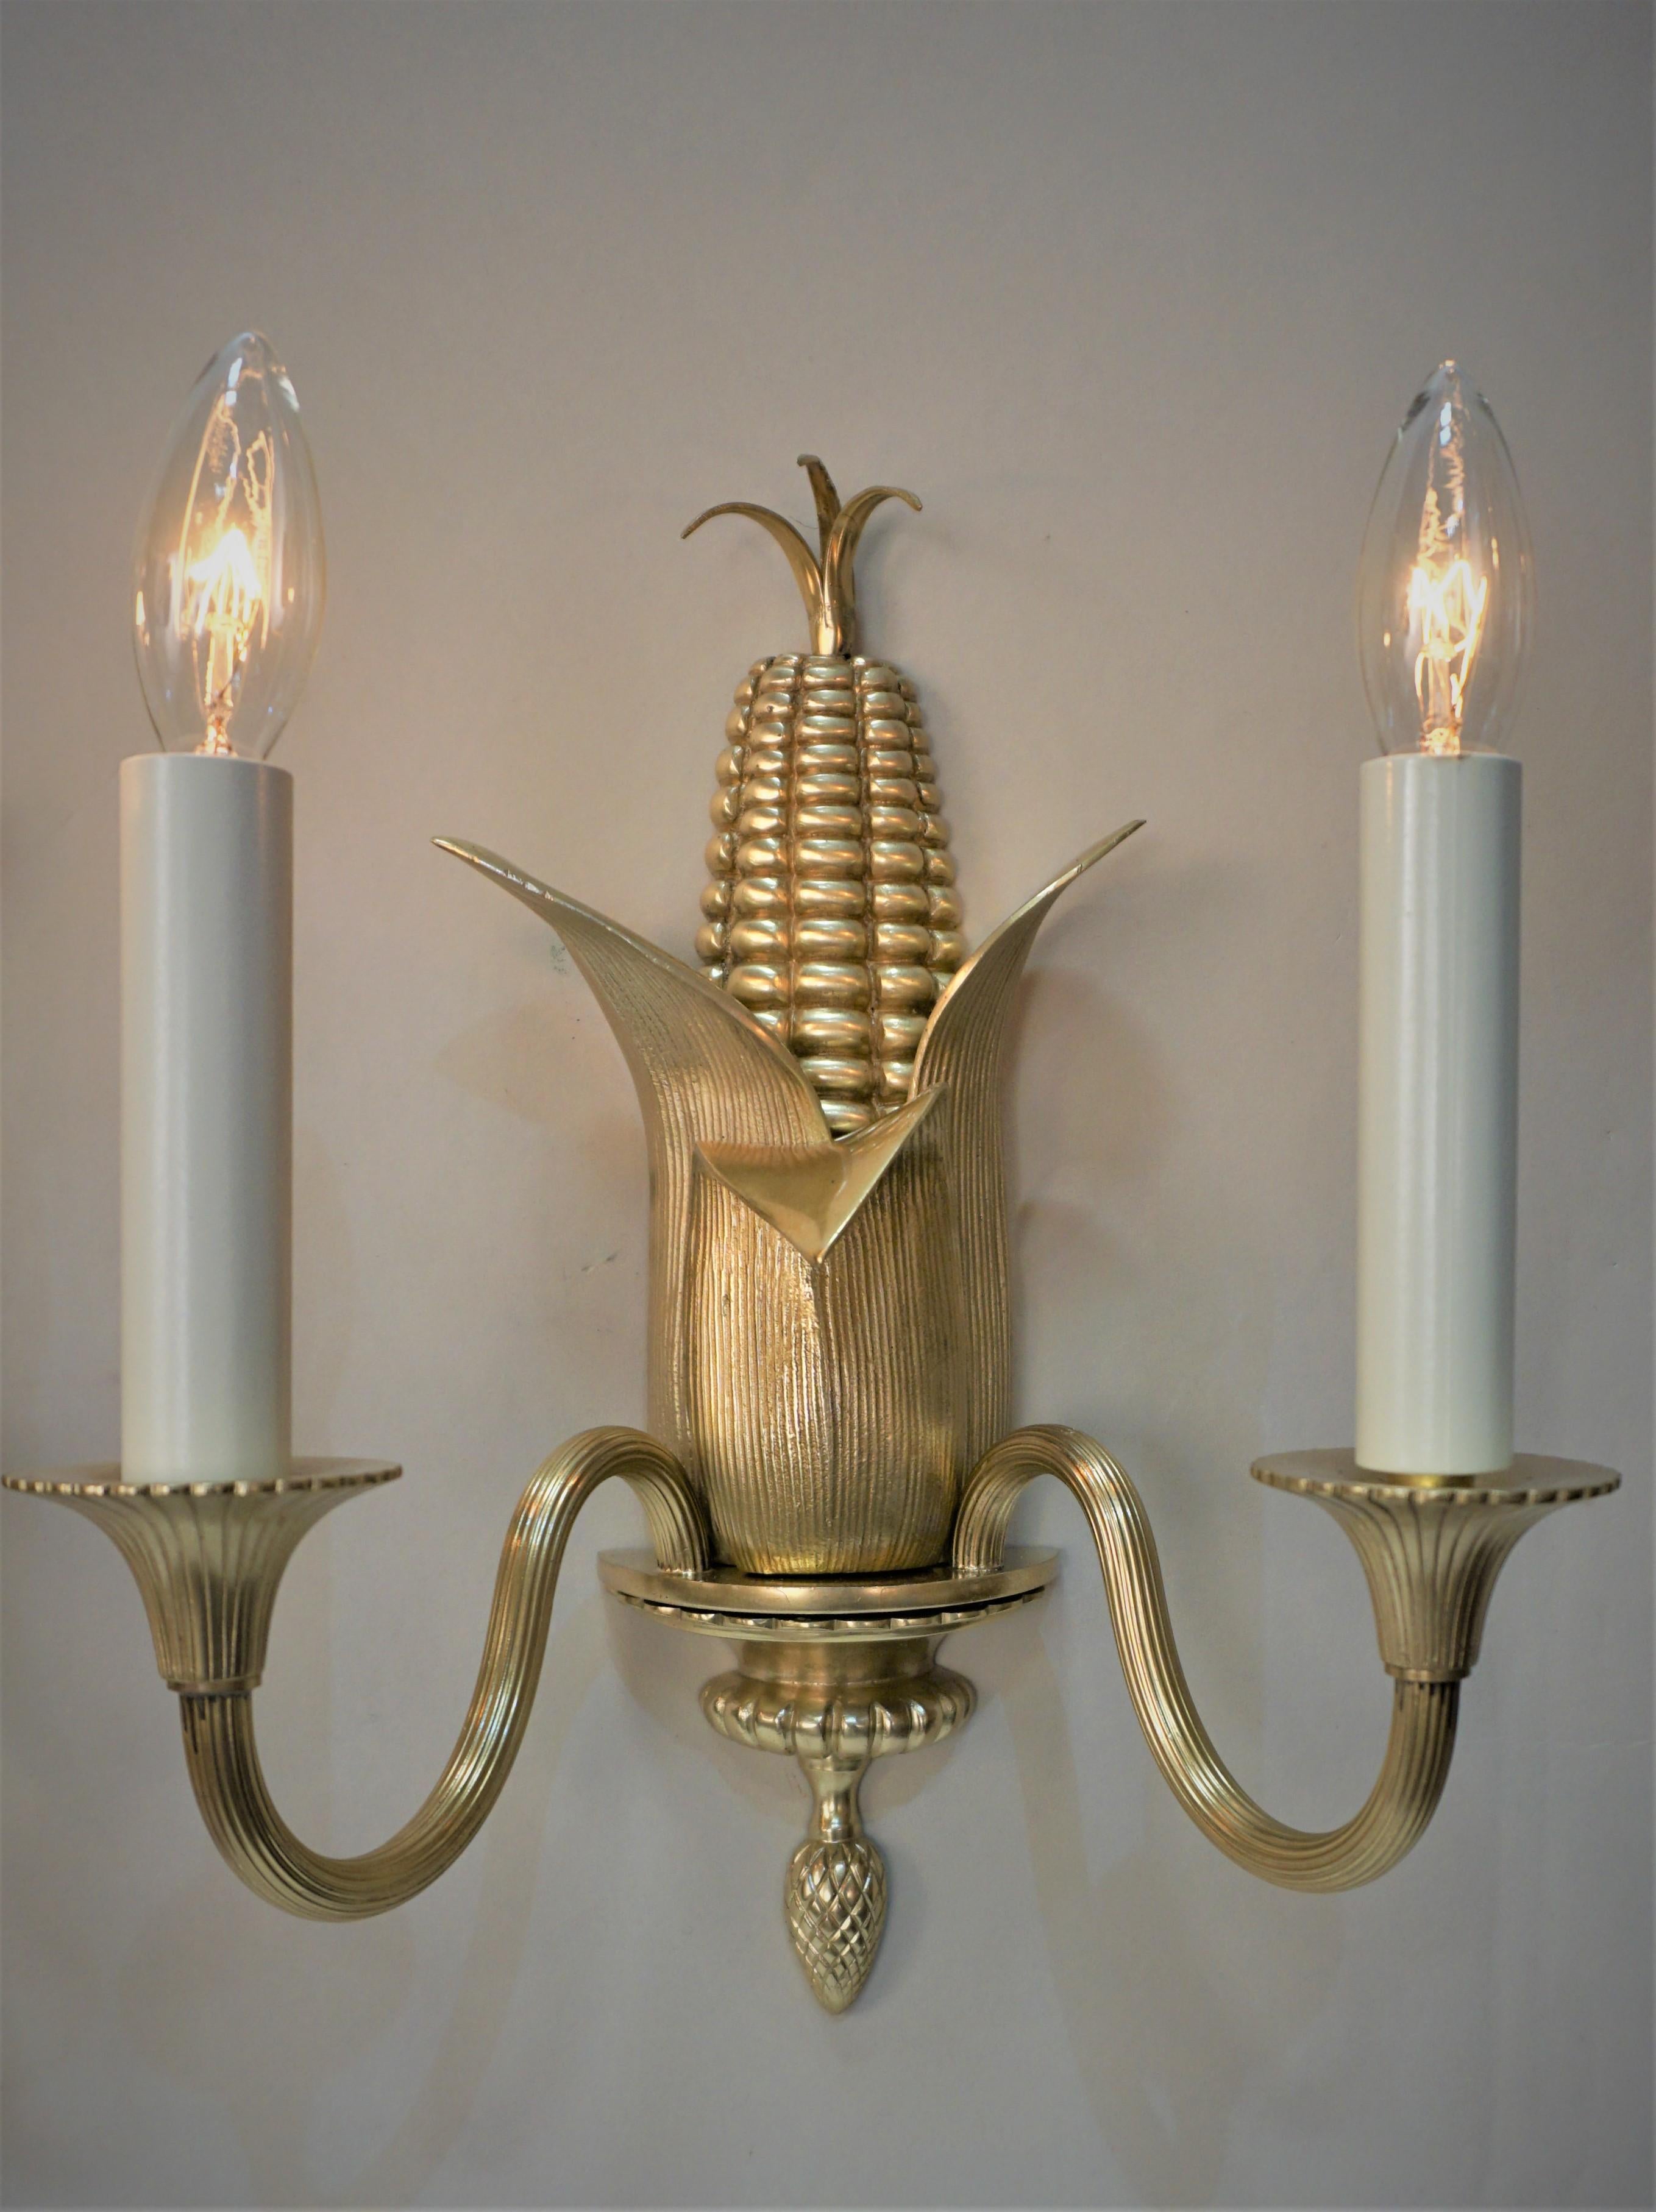 Pair of corn design Maison Charles bronze wall sconces.
Back measurement: the widest point is 2.75